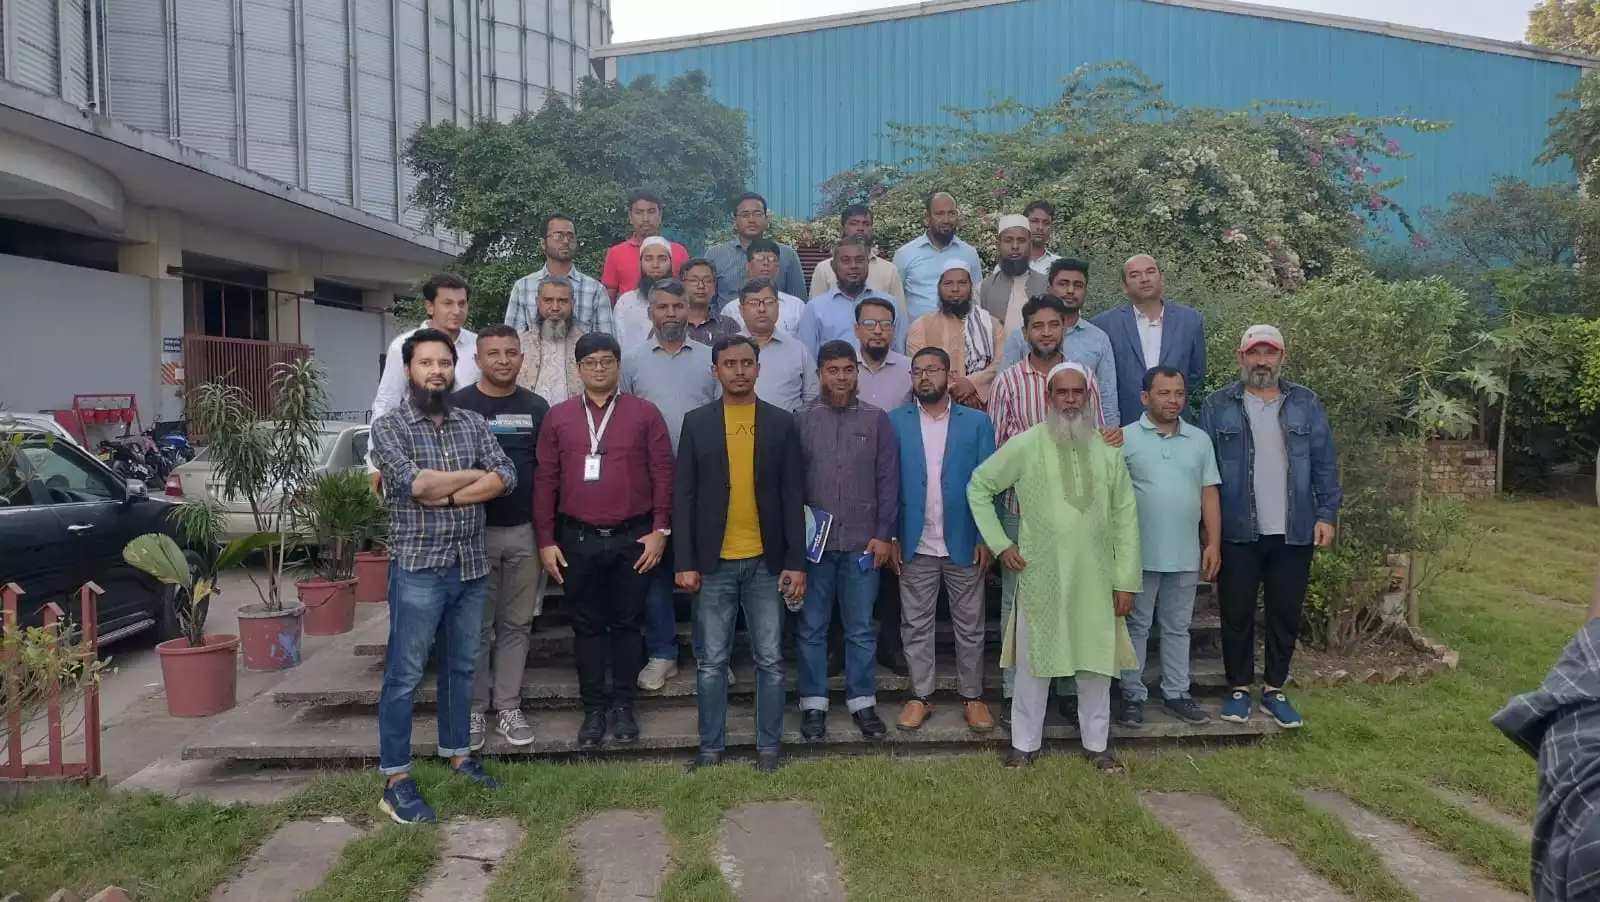 PoultryTech Bangladesh Hosts Capacity Building and Knowledge Transfer Workshops for Bangladeshi Smallholder Poultry Farmers